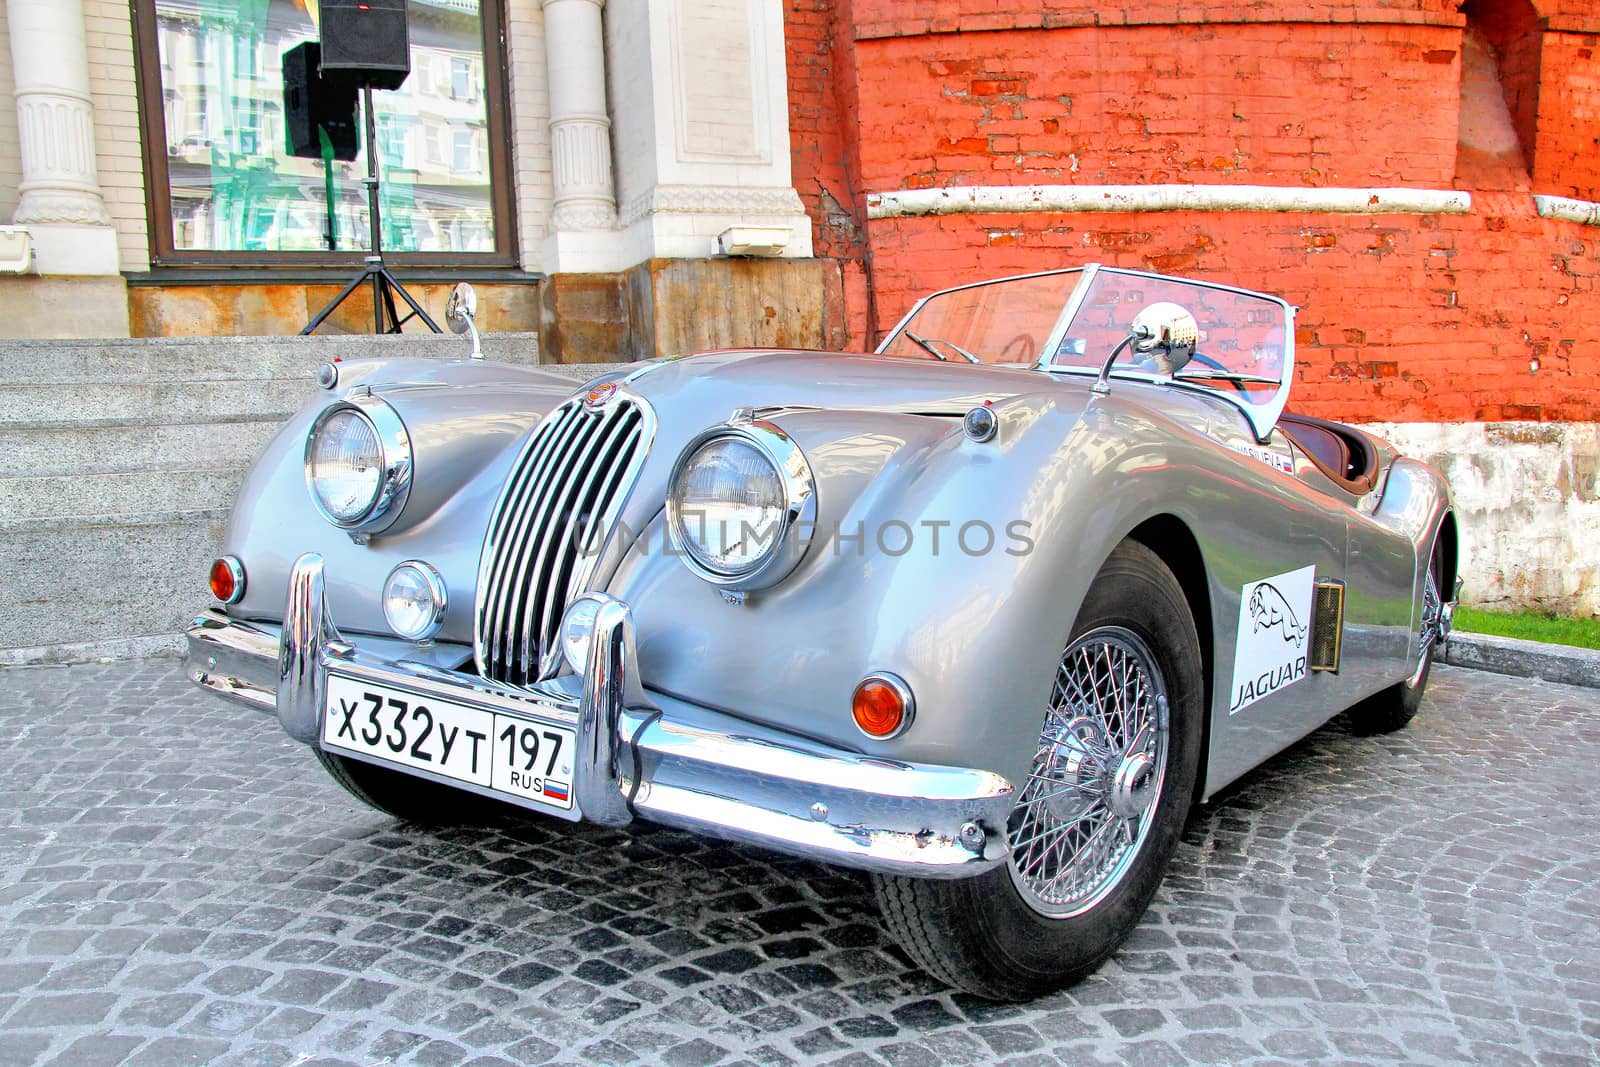 MOSCOW, RUSSIA - JUNE 3: English motor car Jaguar XK150 competes at the annual L.U.C. Chopard Classic Weekend Rally on June 3, 2012 in Moscow, Russia.